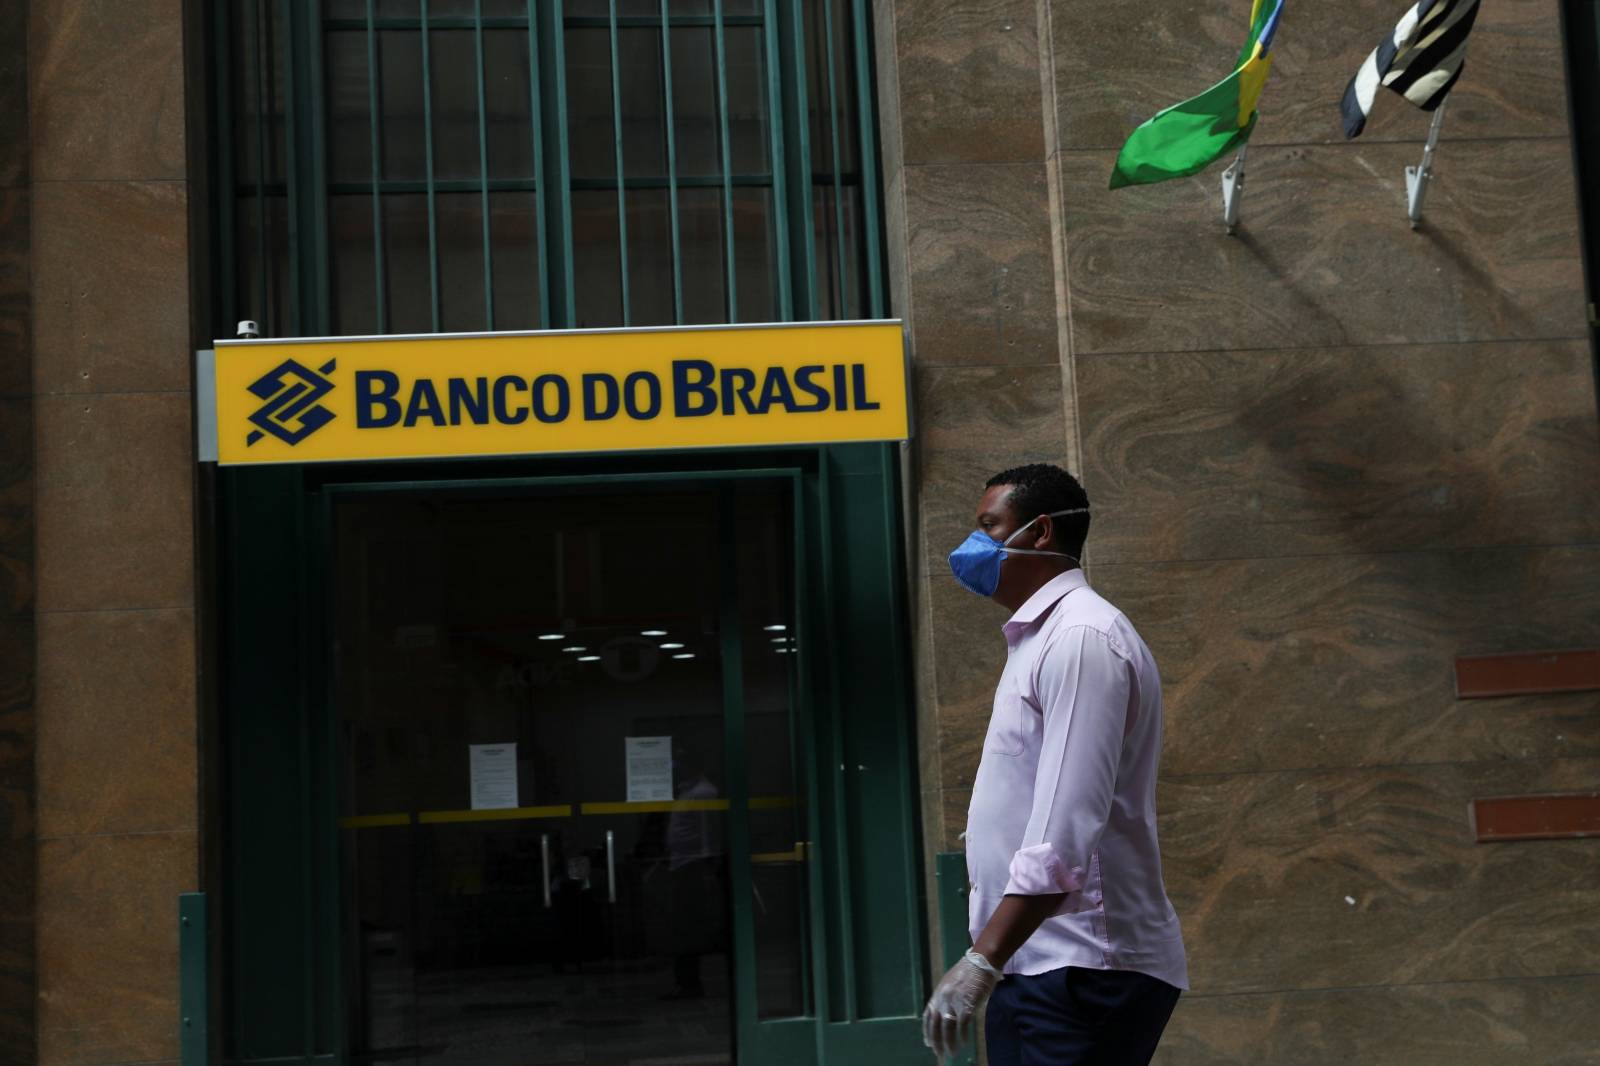 A man wearing a protective face mask and gloves walks in front of Banco do Brasil (Bank of Brazil) during the coronavirus disease (COVID-19) outbreak in Sao Paulo